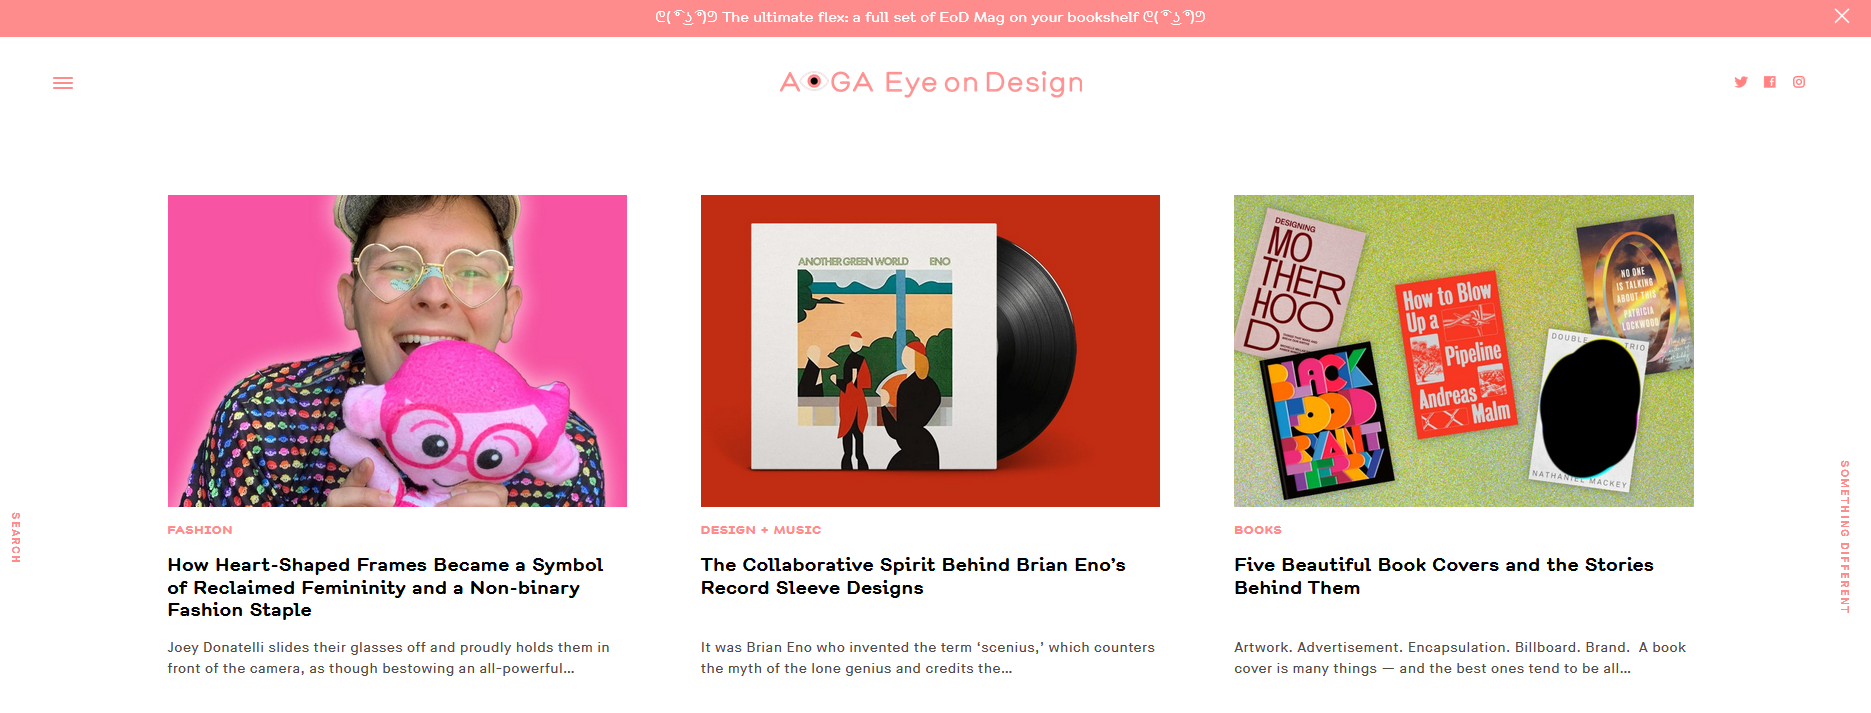 AIGA Eye on Design Top 30+ MOST Inspirational Blogs for Graphic Designers That you Should Follow - 33